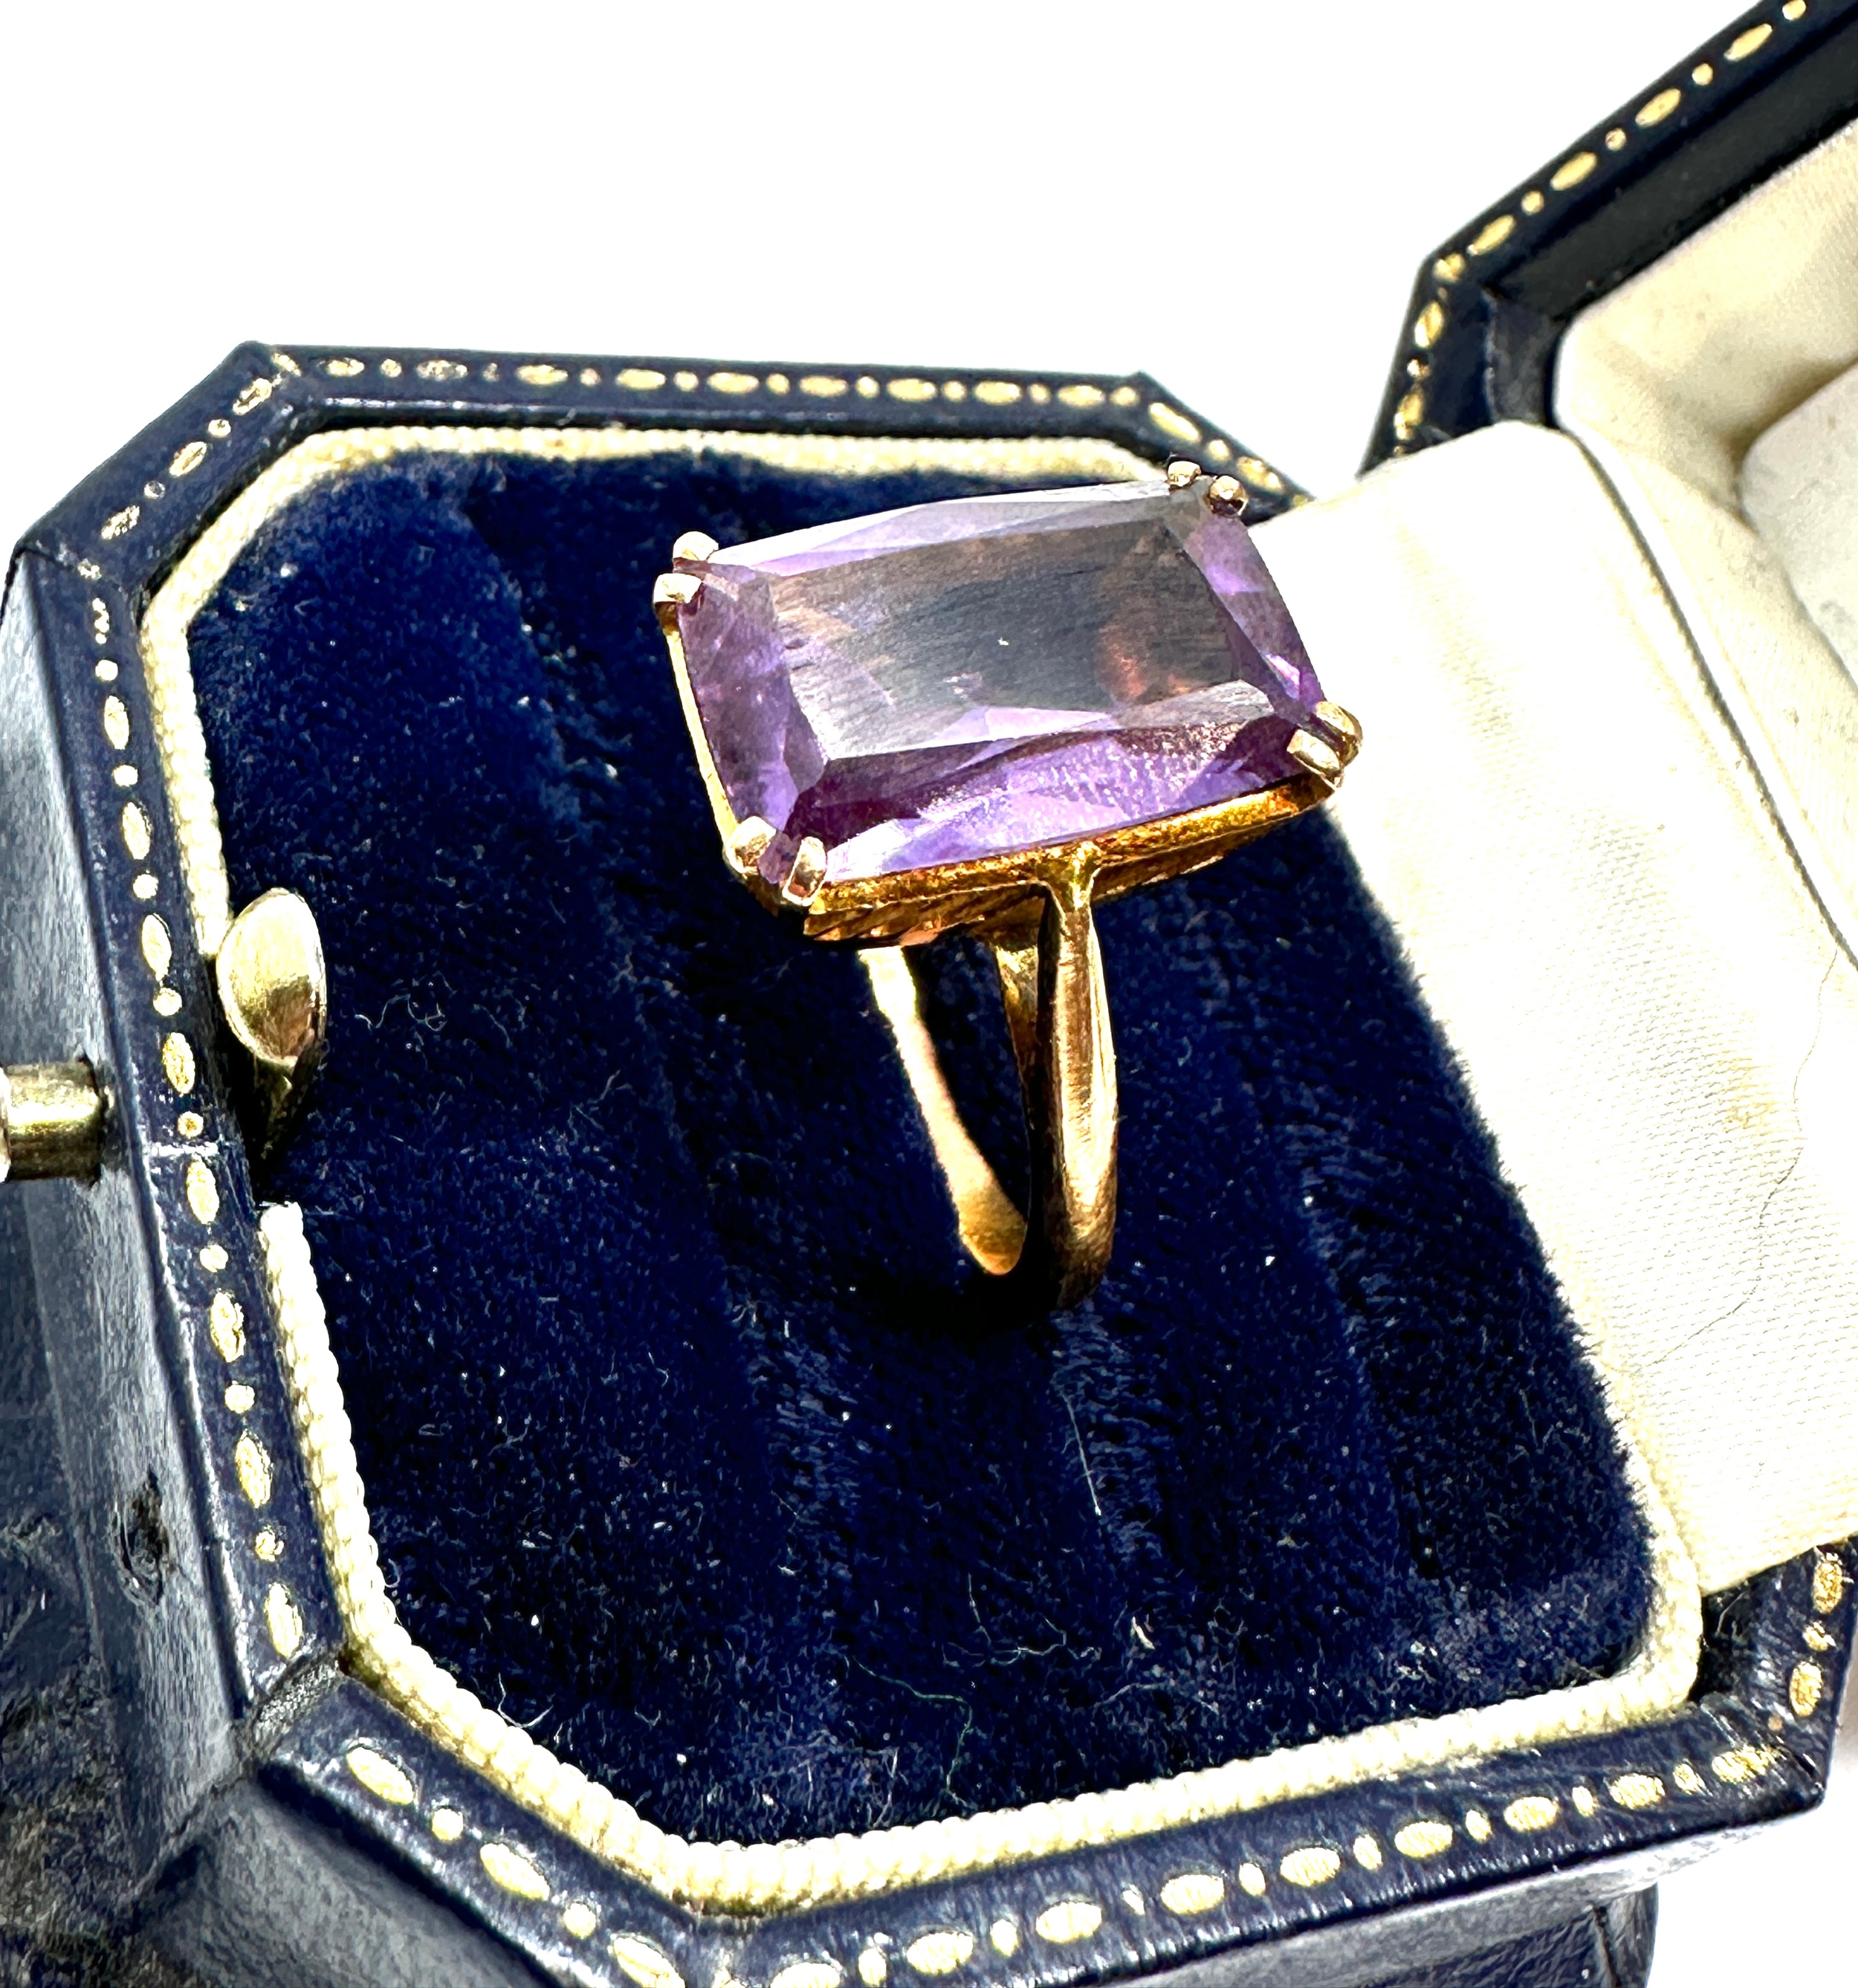 18ct gold amethyst ring weight 5g xrt tested as 18ct gold - Image 3 of 4